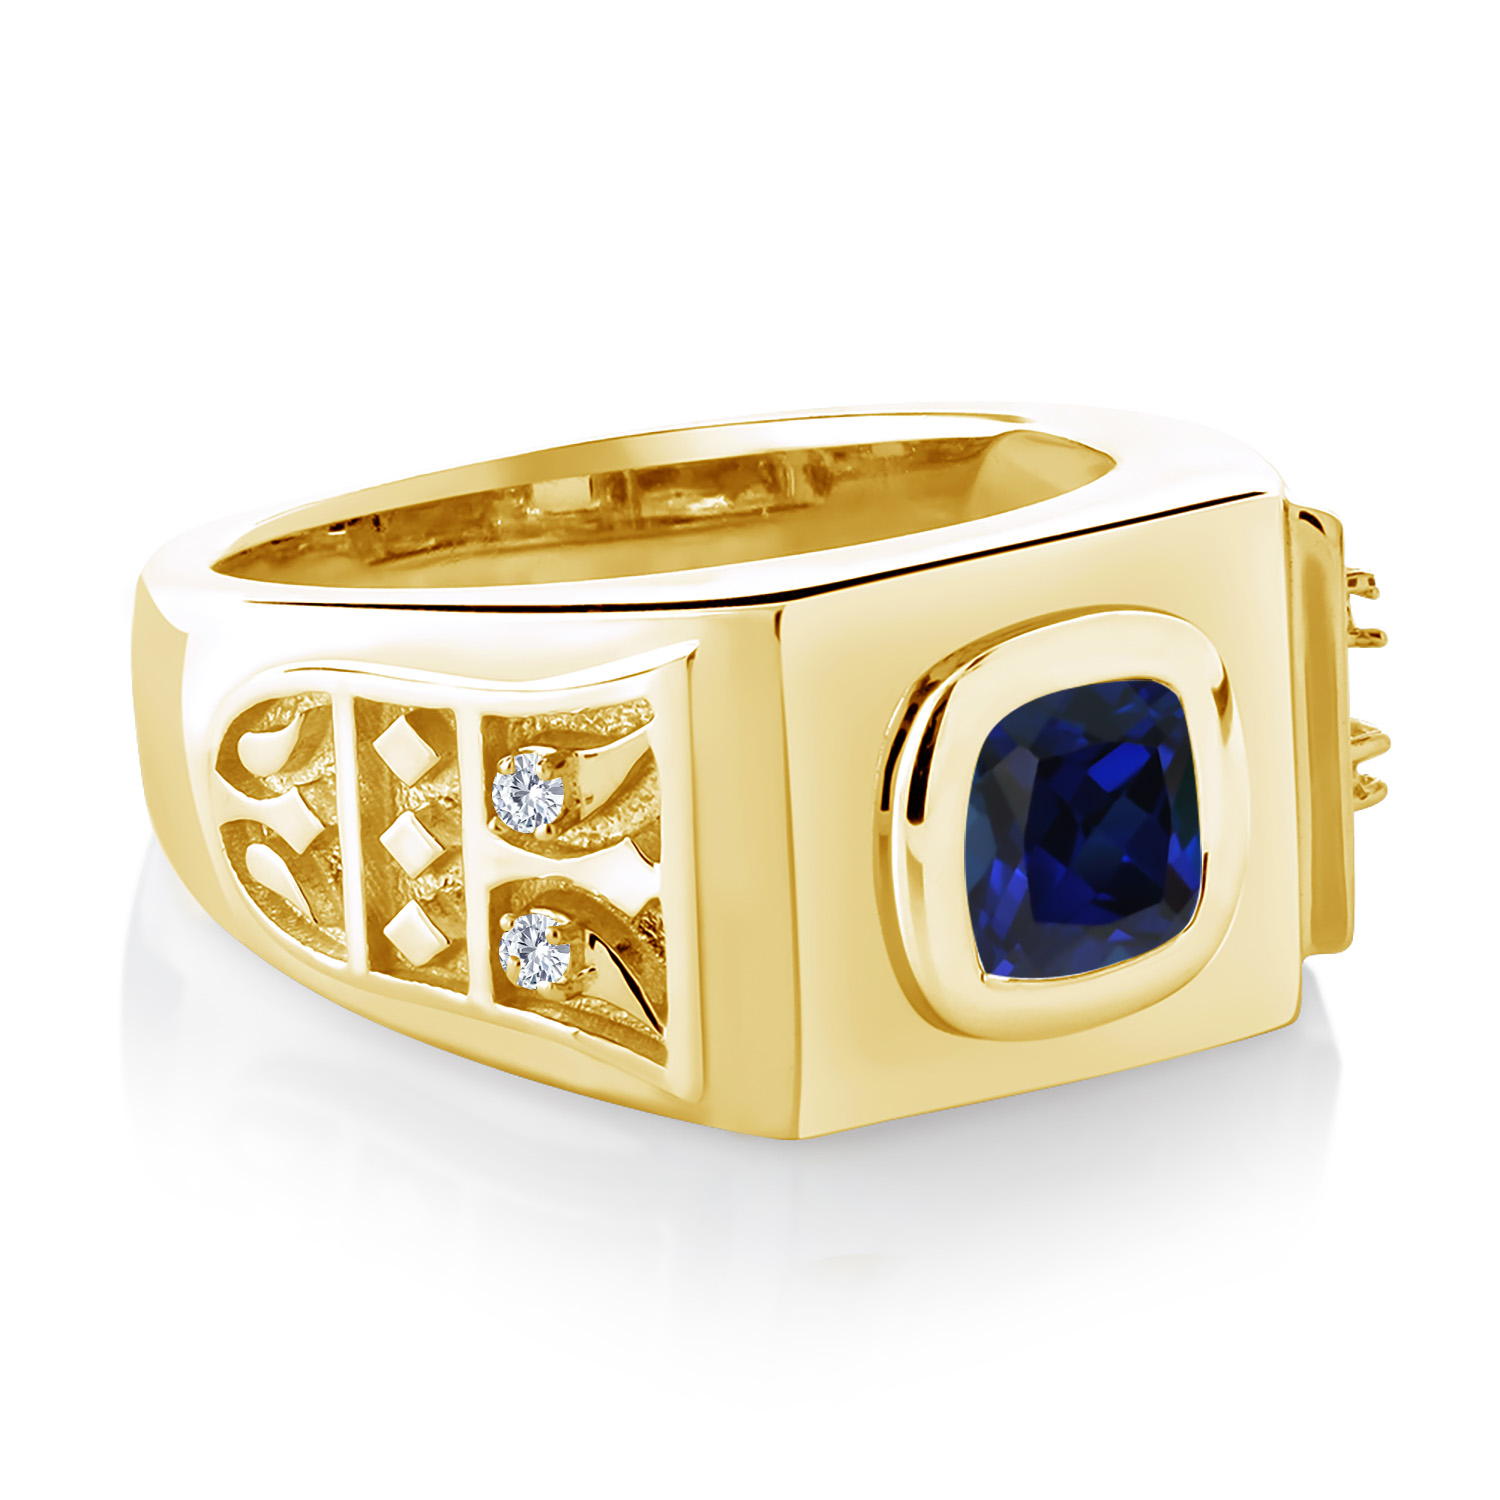 Gem Stone King 18K Yellow Gold Plated Silver Men's Ring Created Sapphire Moissanite (2.53 Cttw)